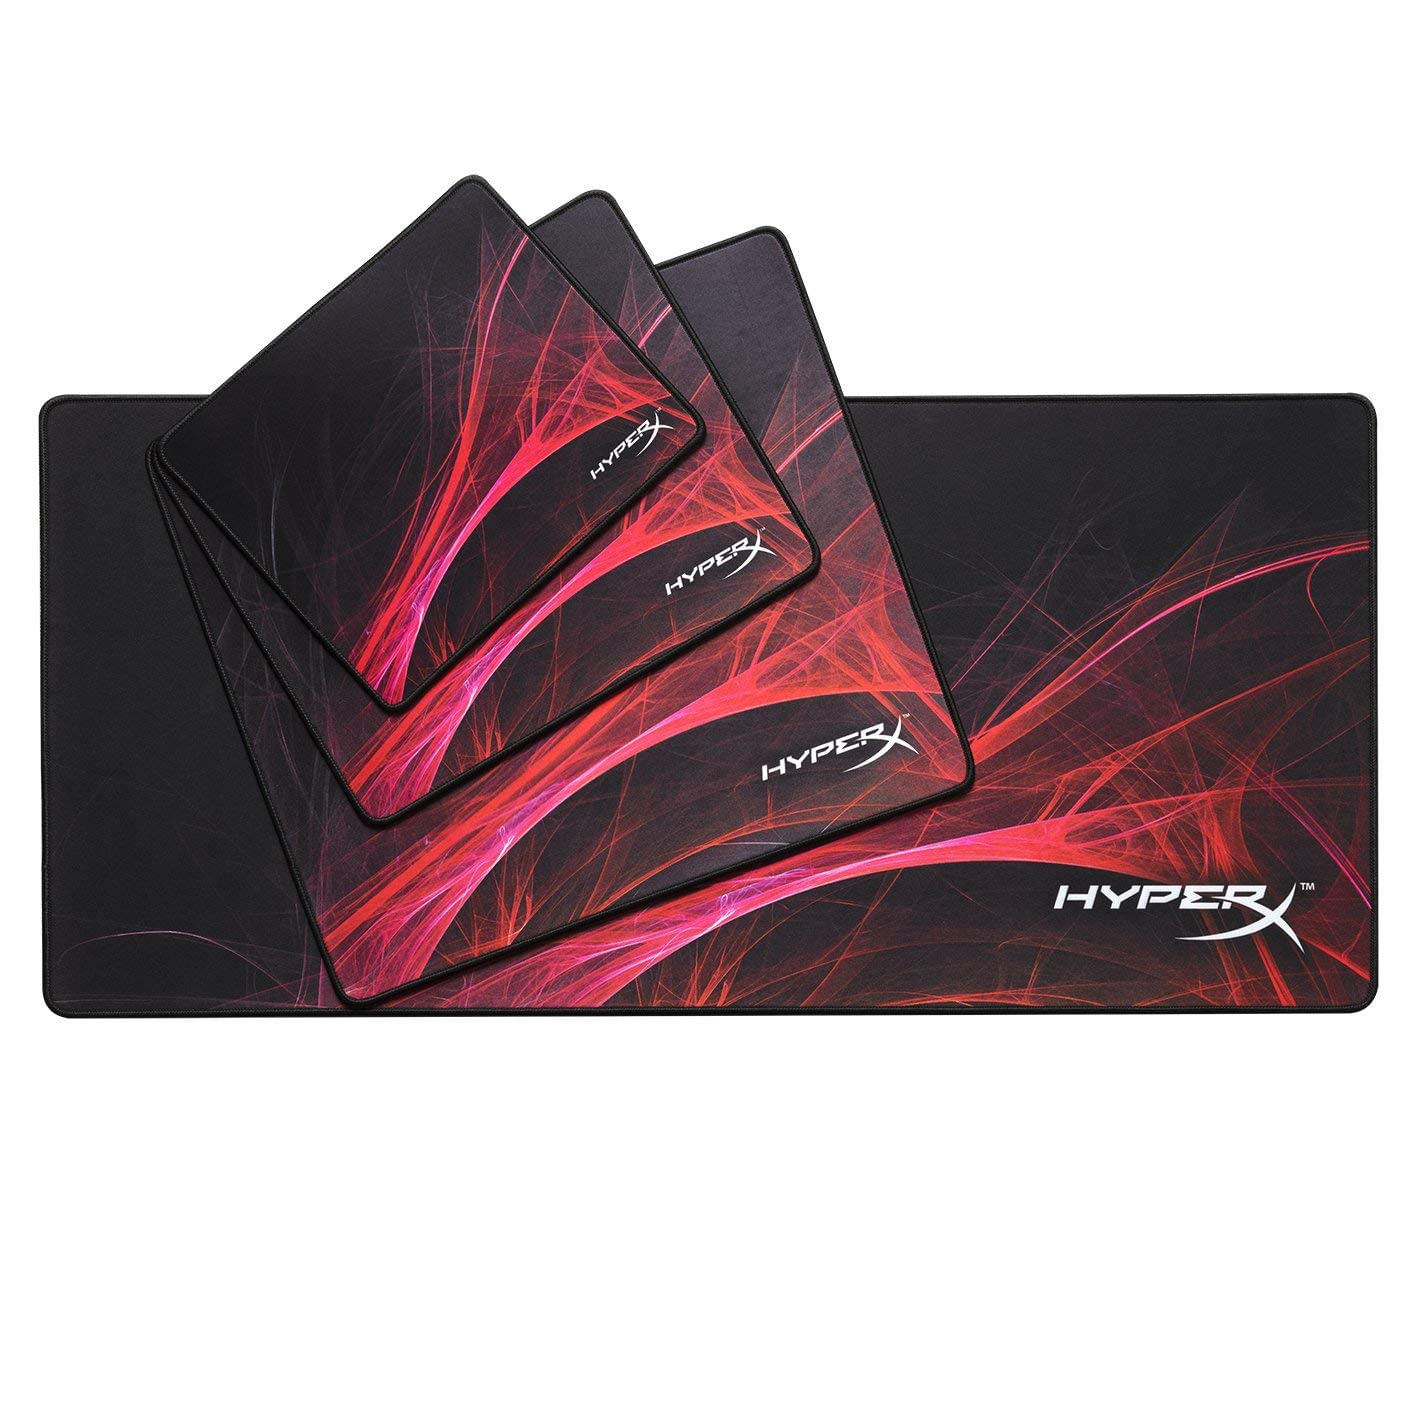 Mouse Pad Hyperx Fury S Speed Edition Pro Gaming Large 450x400x4mm - HX-MPFS-S-L